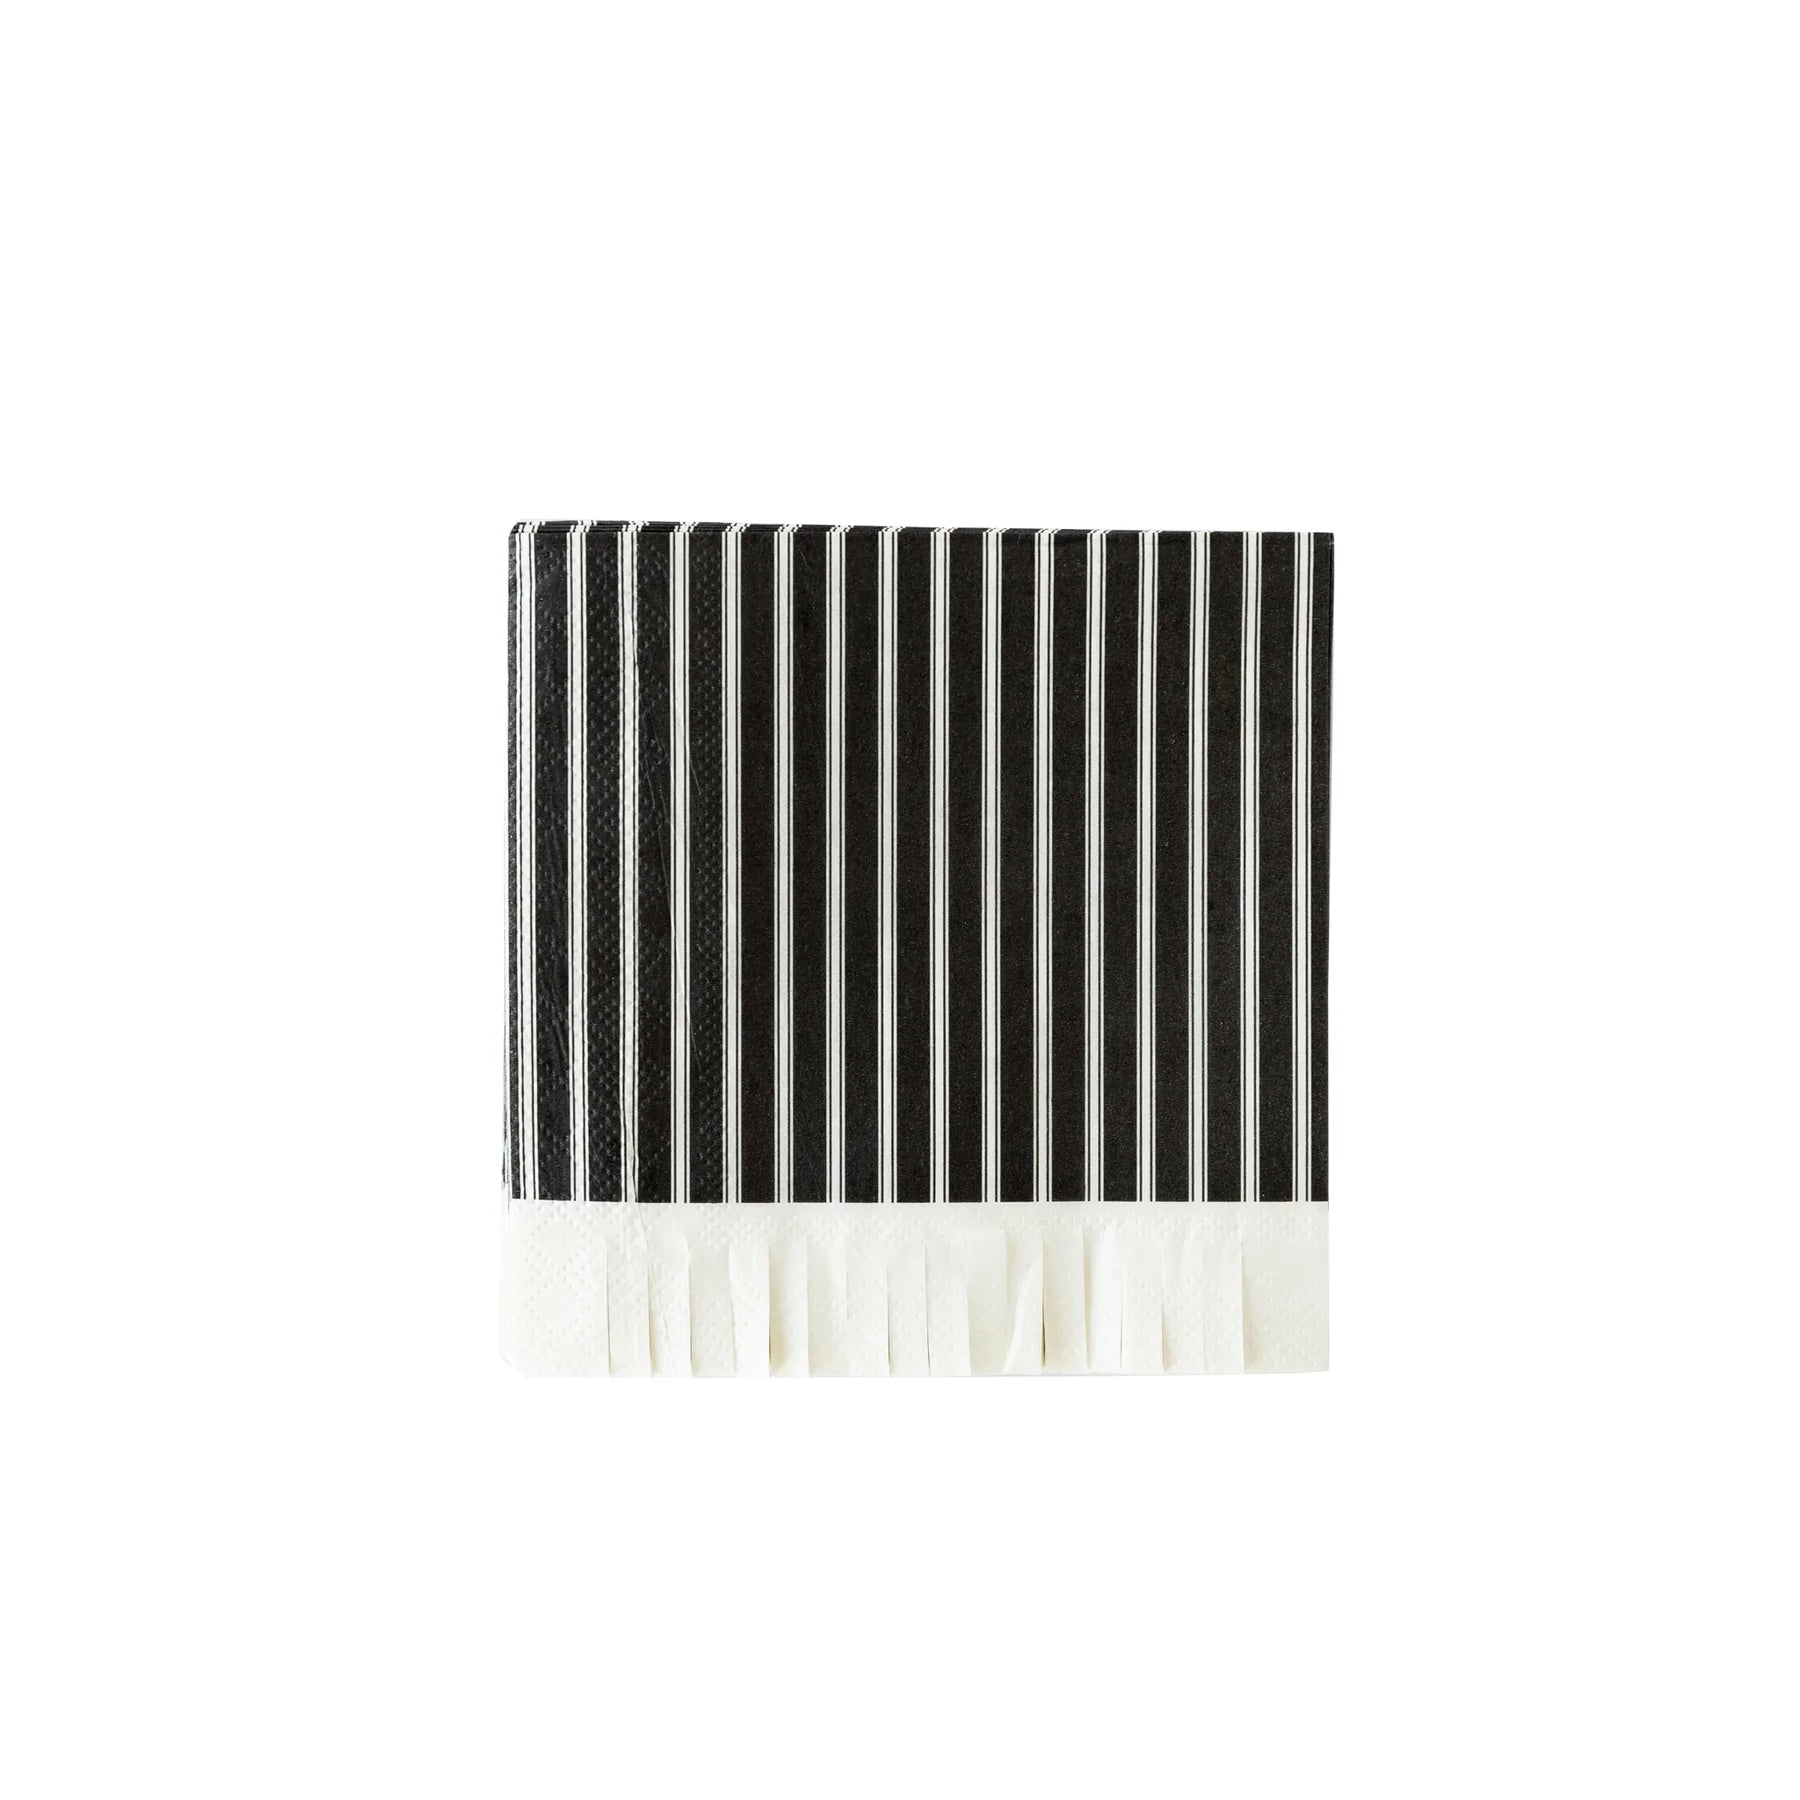 Black napkins with white stripes and a fun fringe, by My Minds Eye, available at A Little Confetti